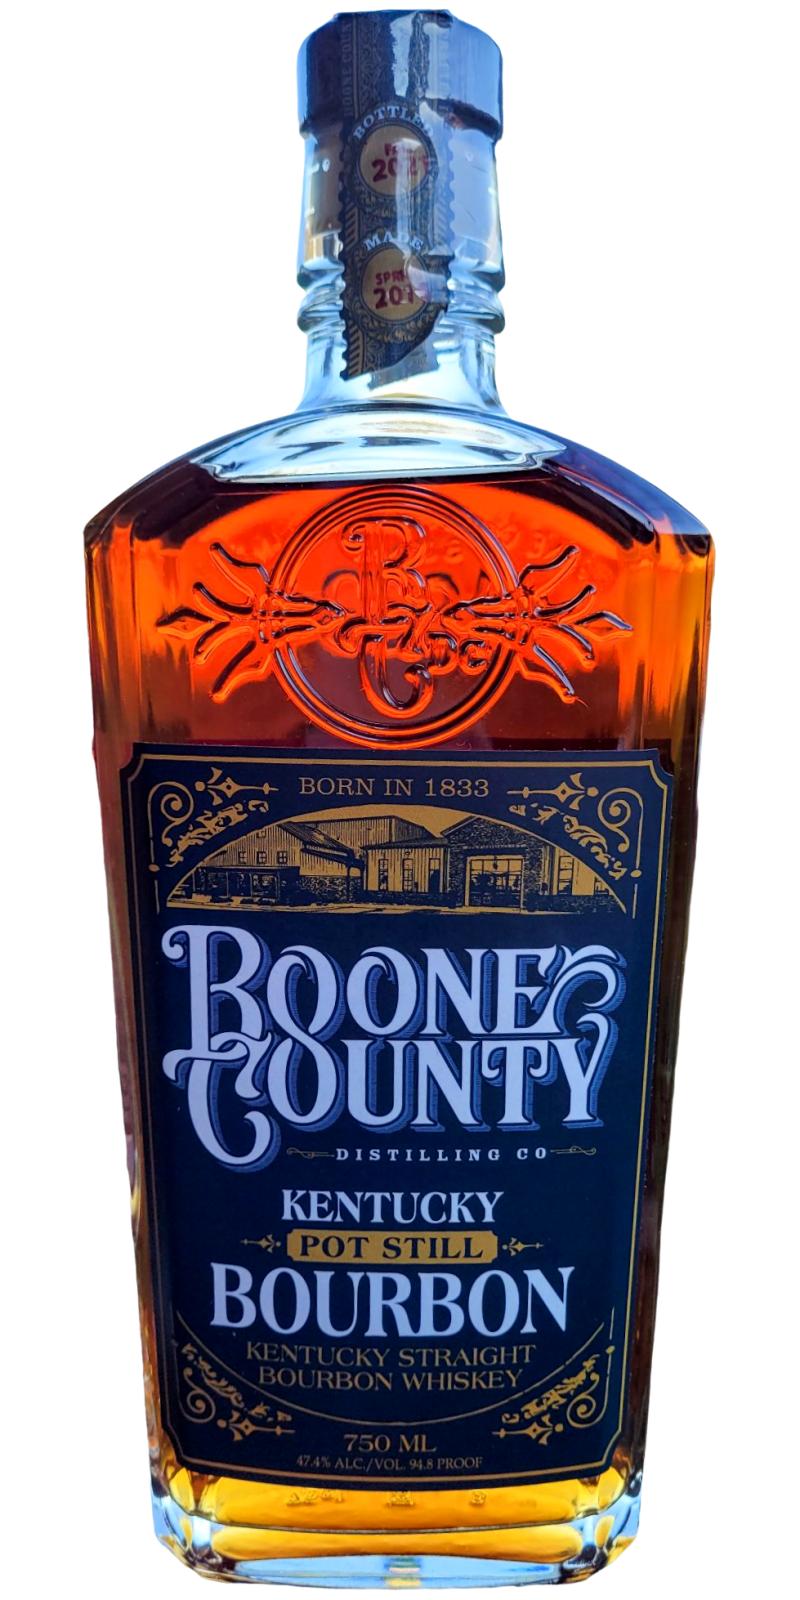 Boone County Kentucky Pot Still Bourbon - Ratings and reviews - Whiskybase